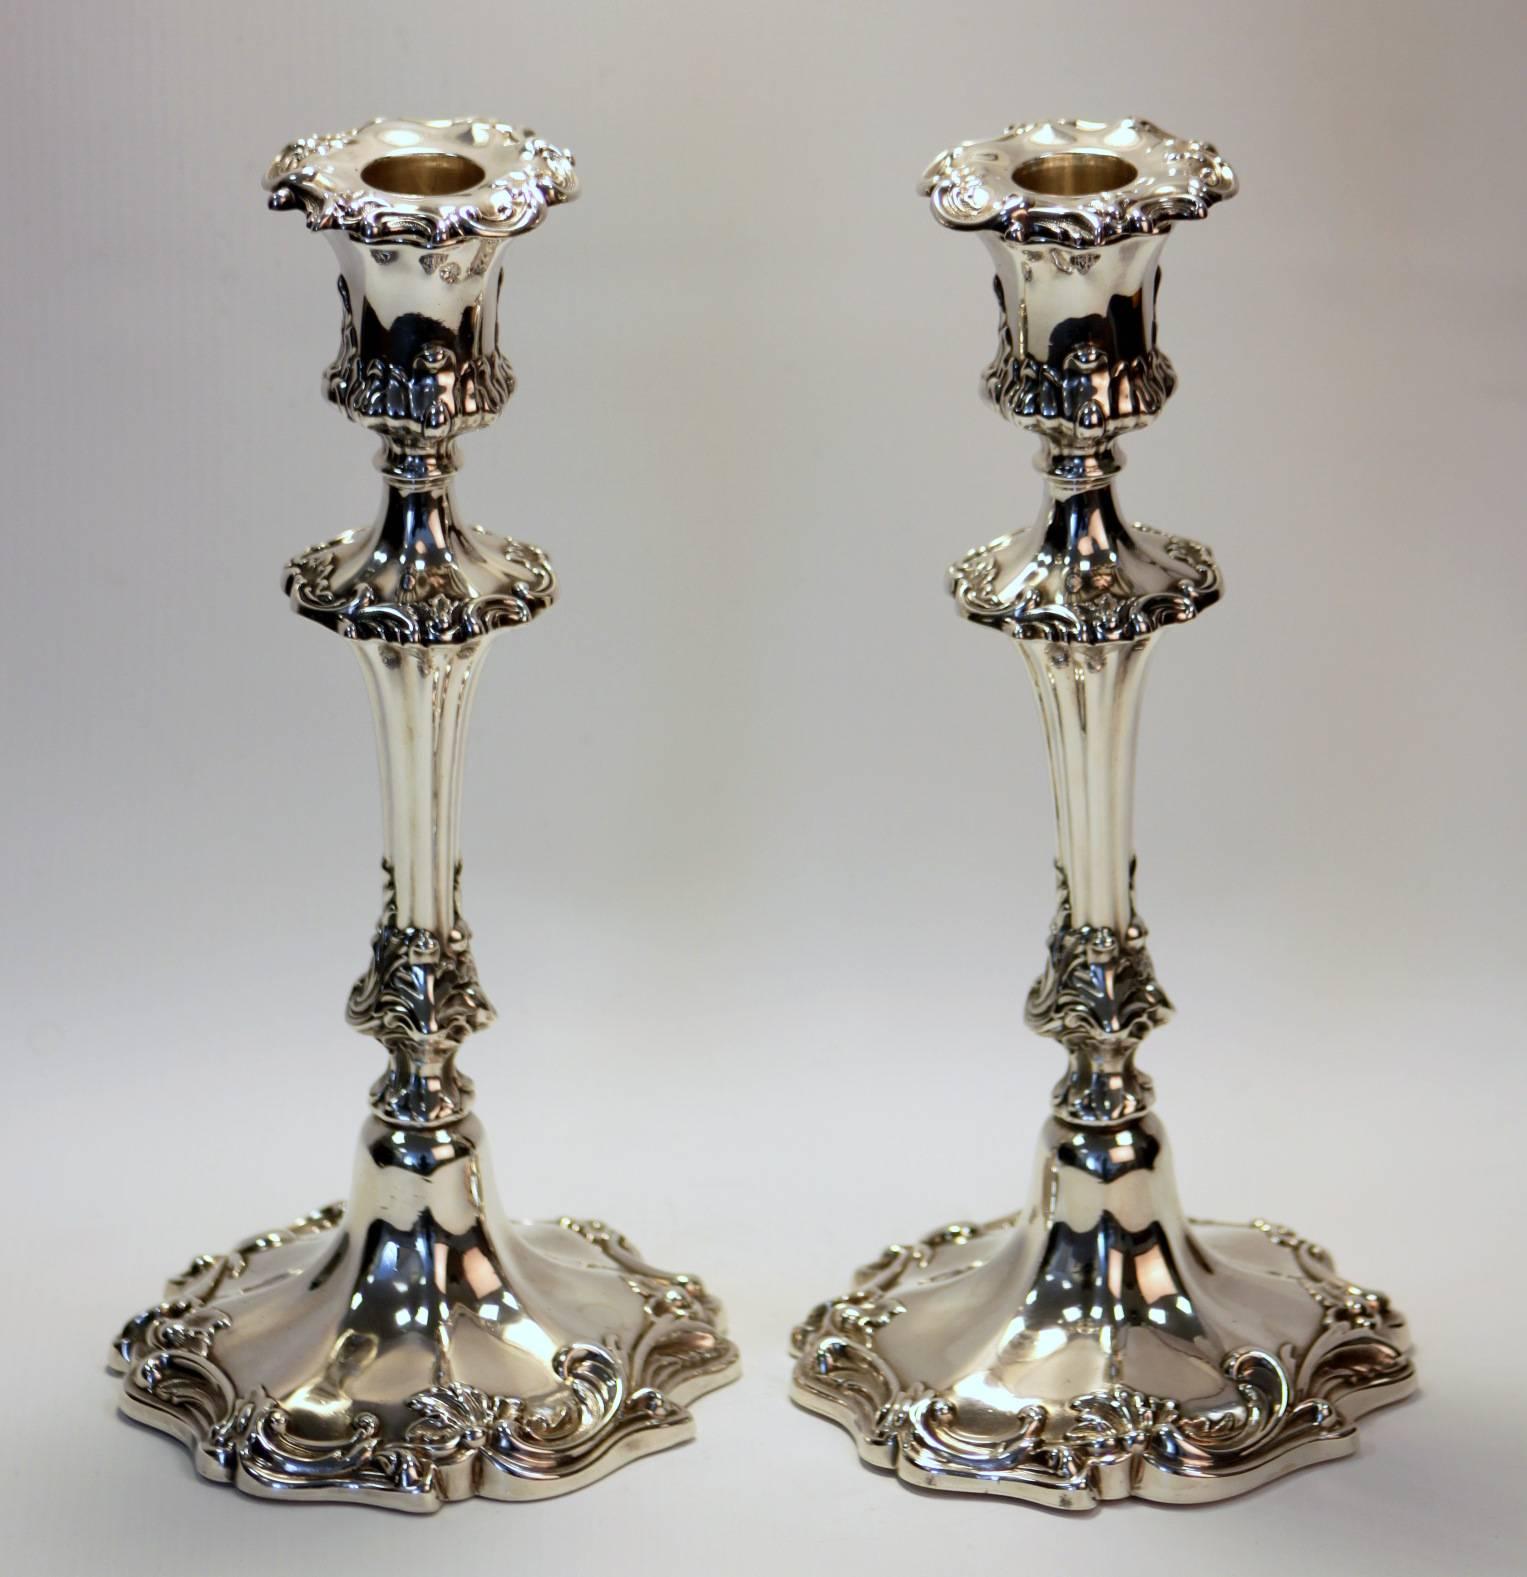 Antique Victorian filled sterling silver pair of candlesticks with floral engravings
Made in Sheffield 1840
Maker: Possibly Henry Wilkinson
Fully hallmarked.

Dimensions: 
Diameter x height : 13 x 26.3 cm
Weight 1: 829 grams
Weight 2: 803